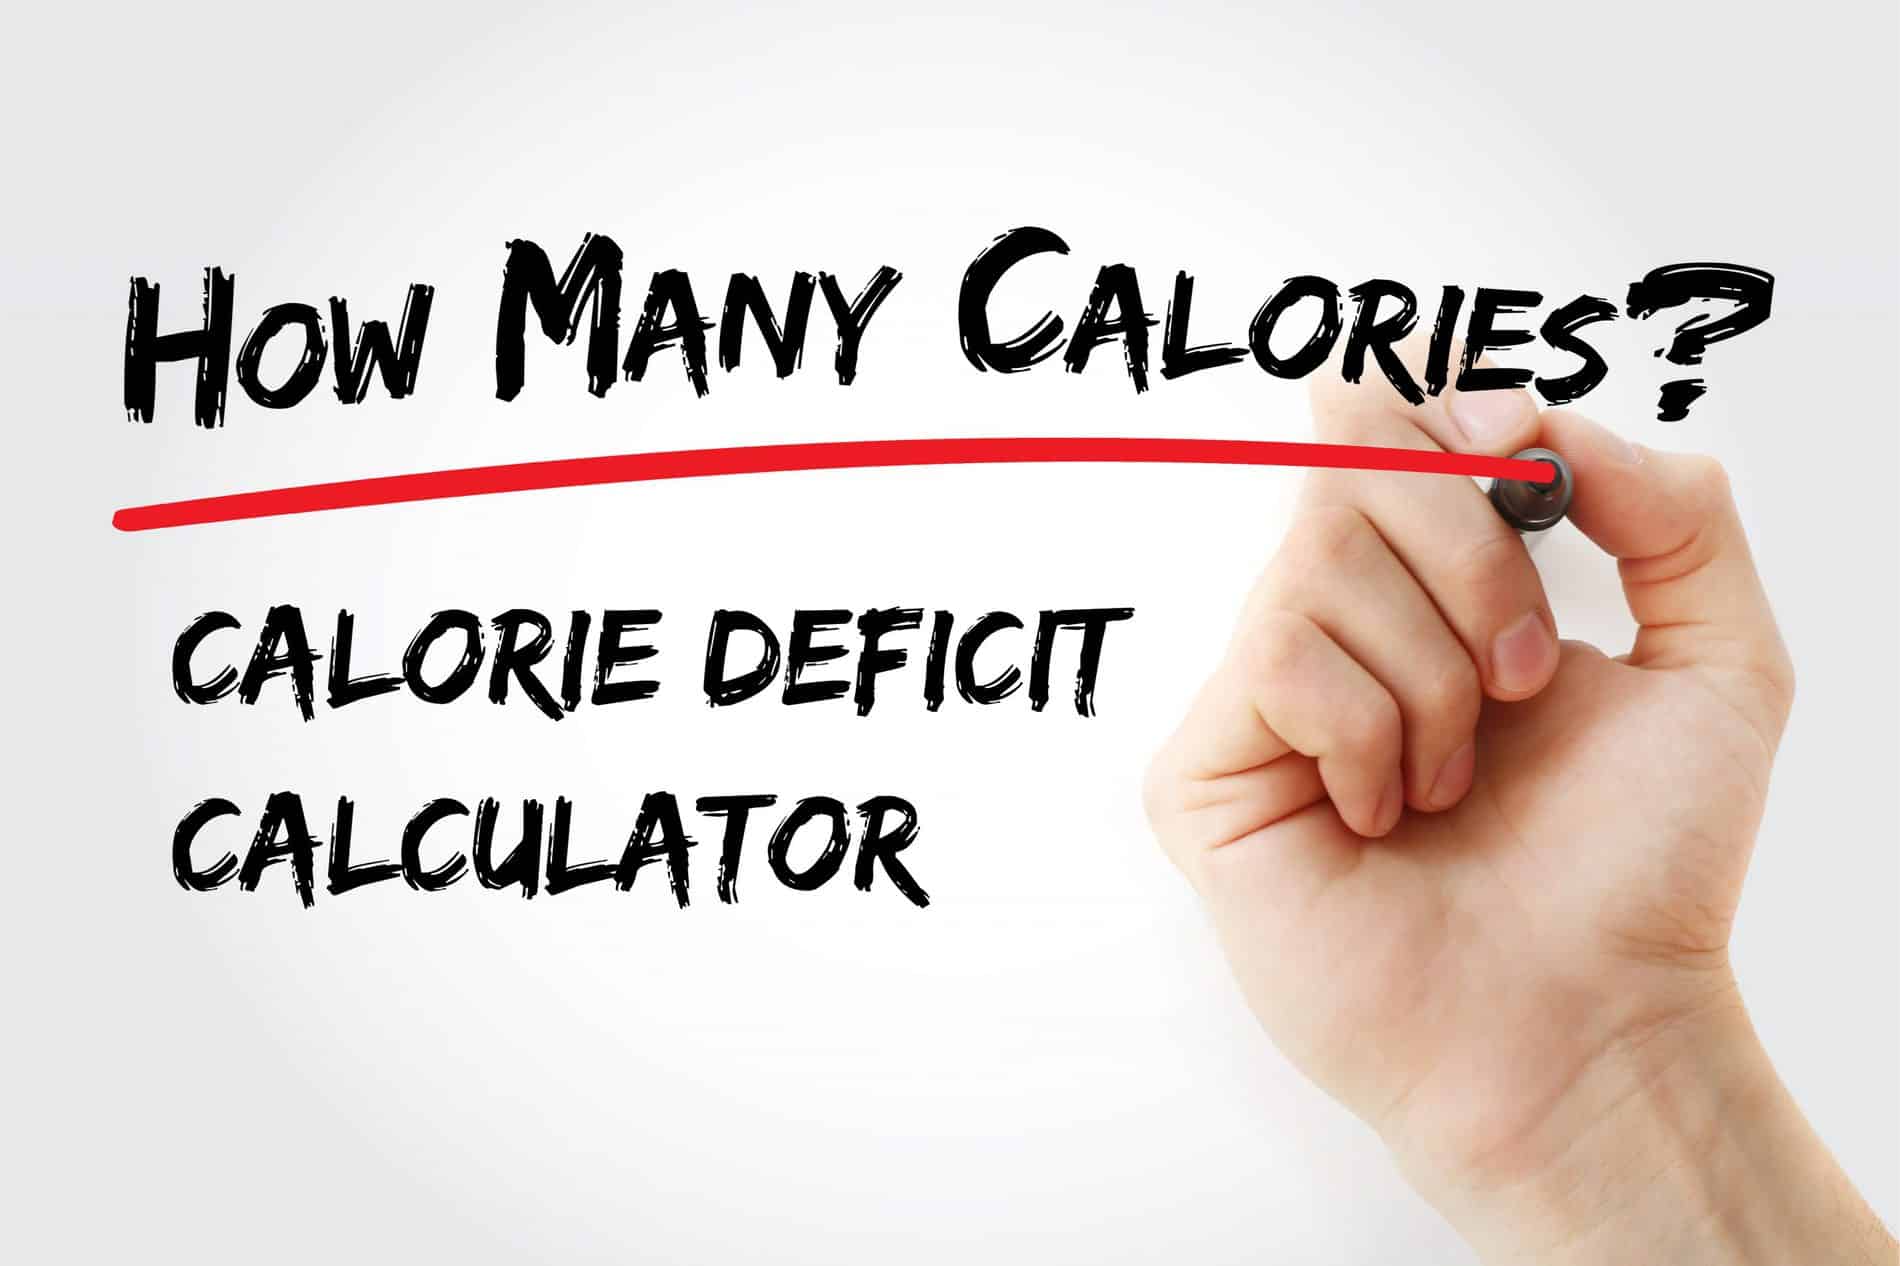 How Many Calories Should I Eat to Lose Weight? Calorie Deficit Calculator